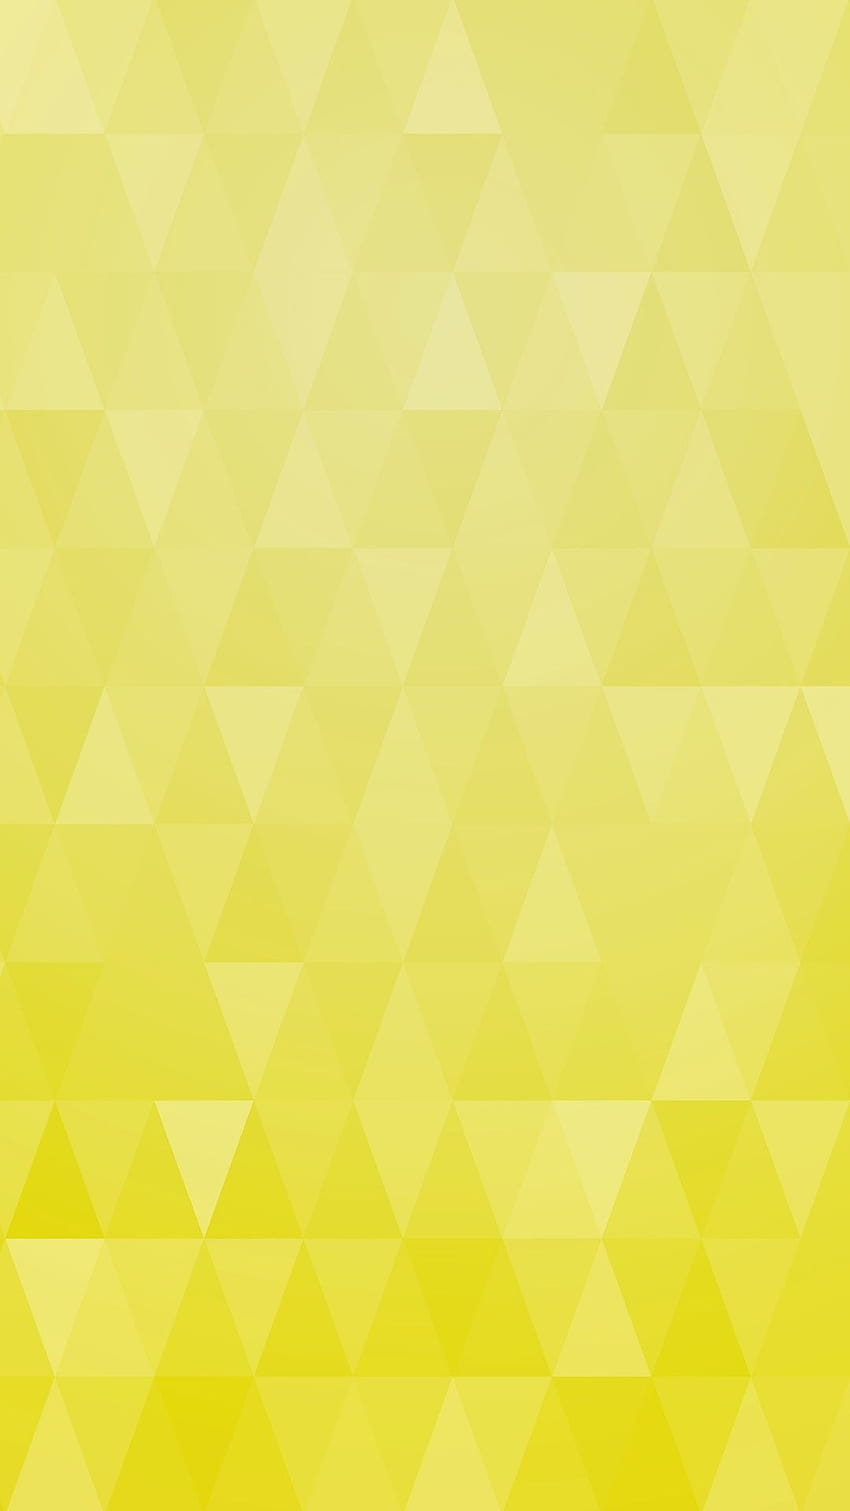 Artistic Pattern Triangle Yellow iPhone 7, 6s, 6 HD phone wallpaper